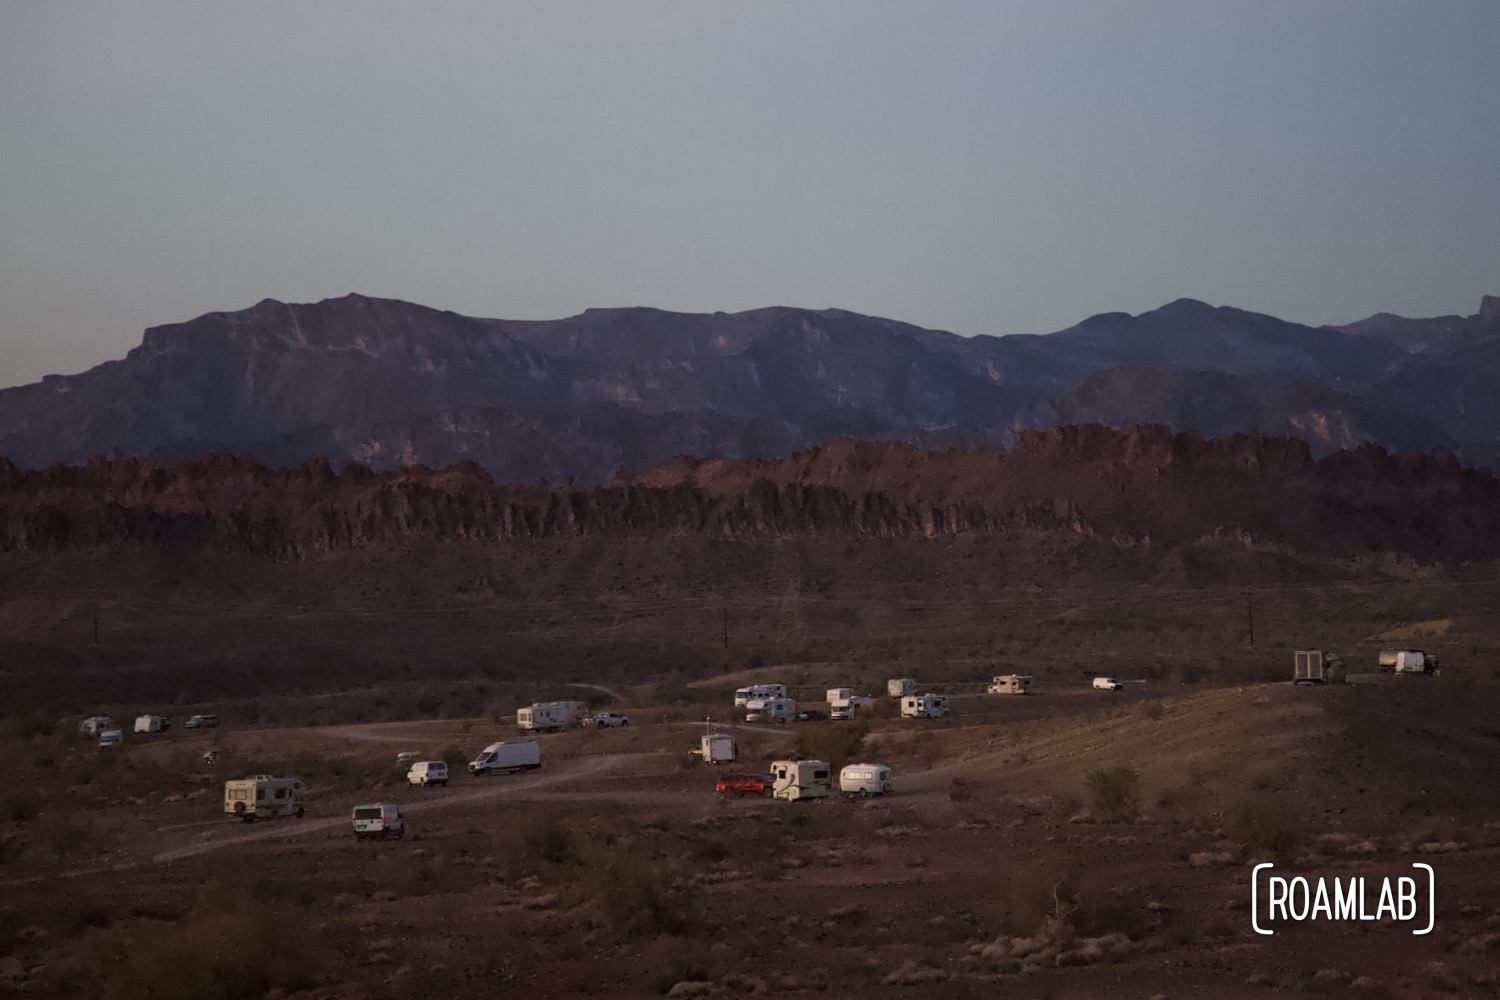 Campers scattered across the valley floor with mountains in the distance at dusk.